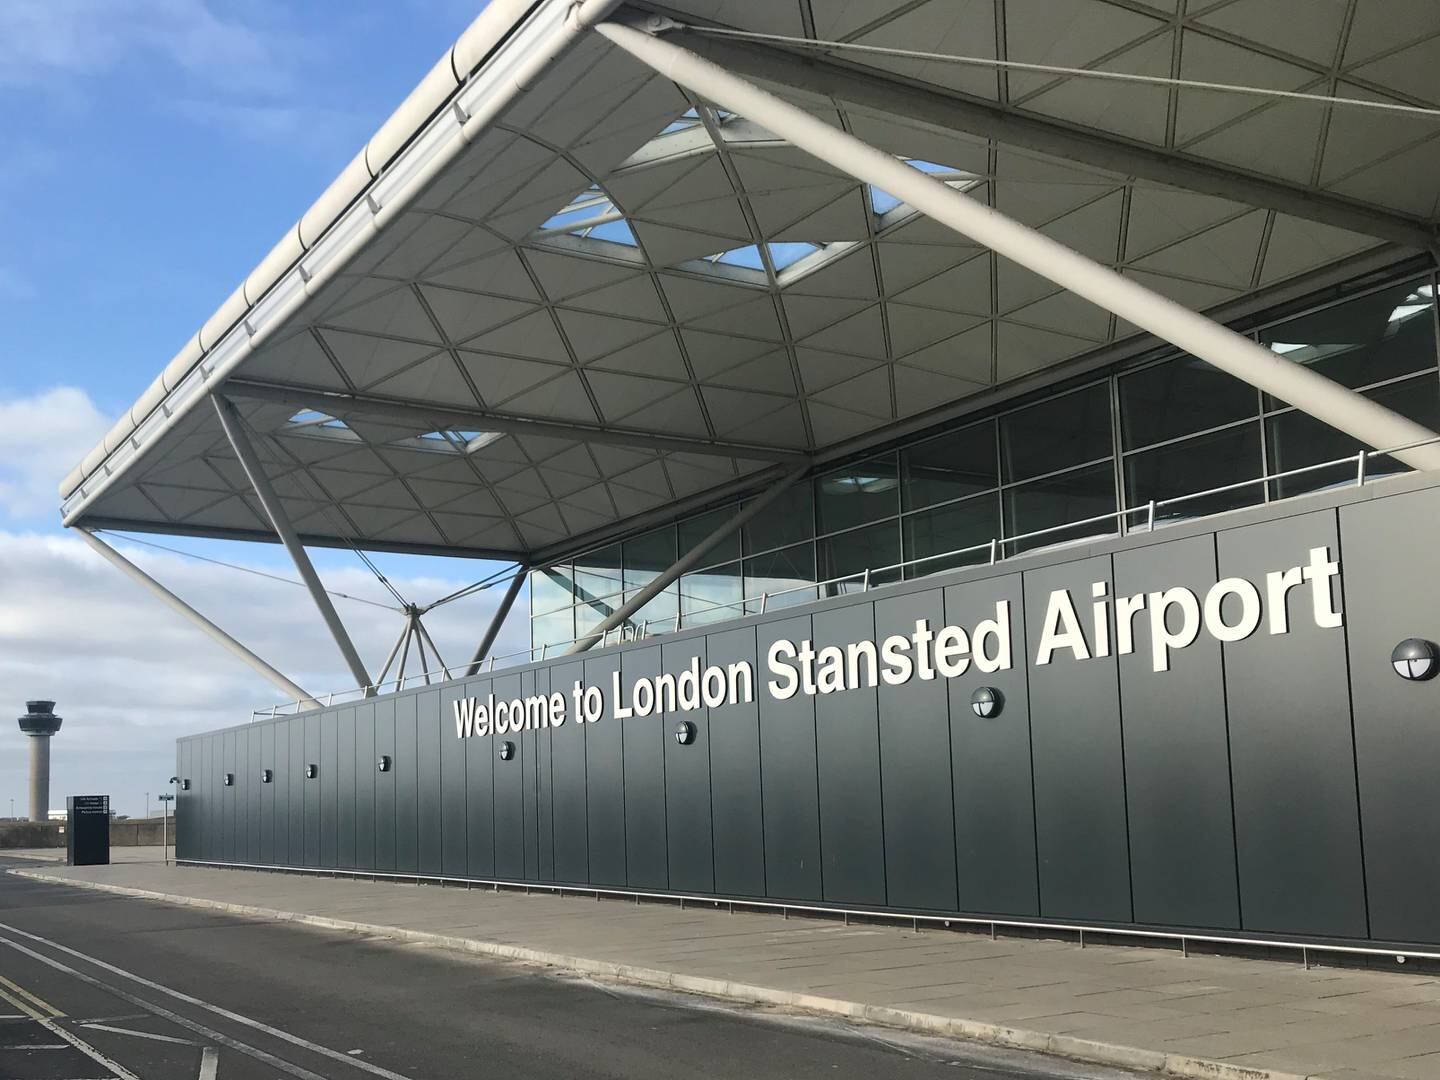 For the first time since March 2020, travellers can now fly Emirates between Dubai and London Stansted. Photo: London Stansted Airport